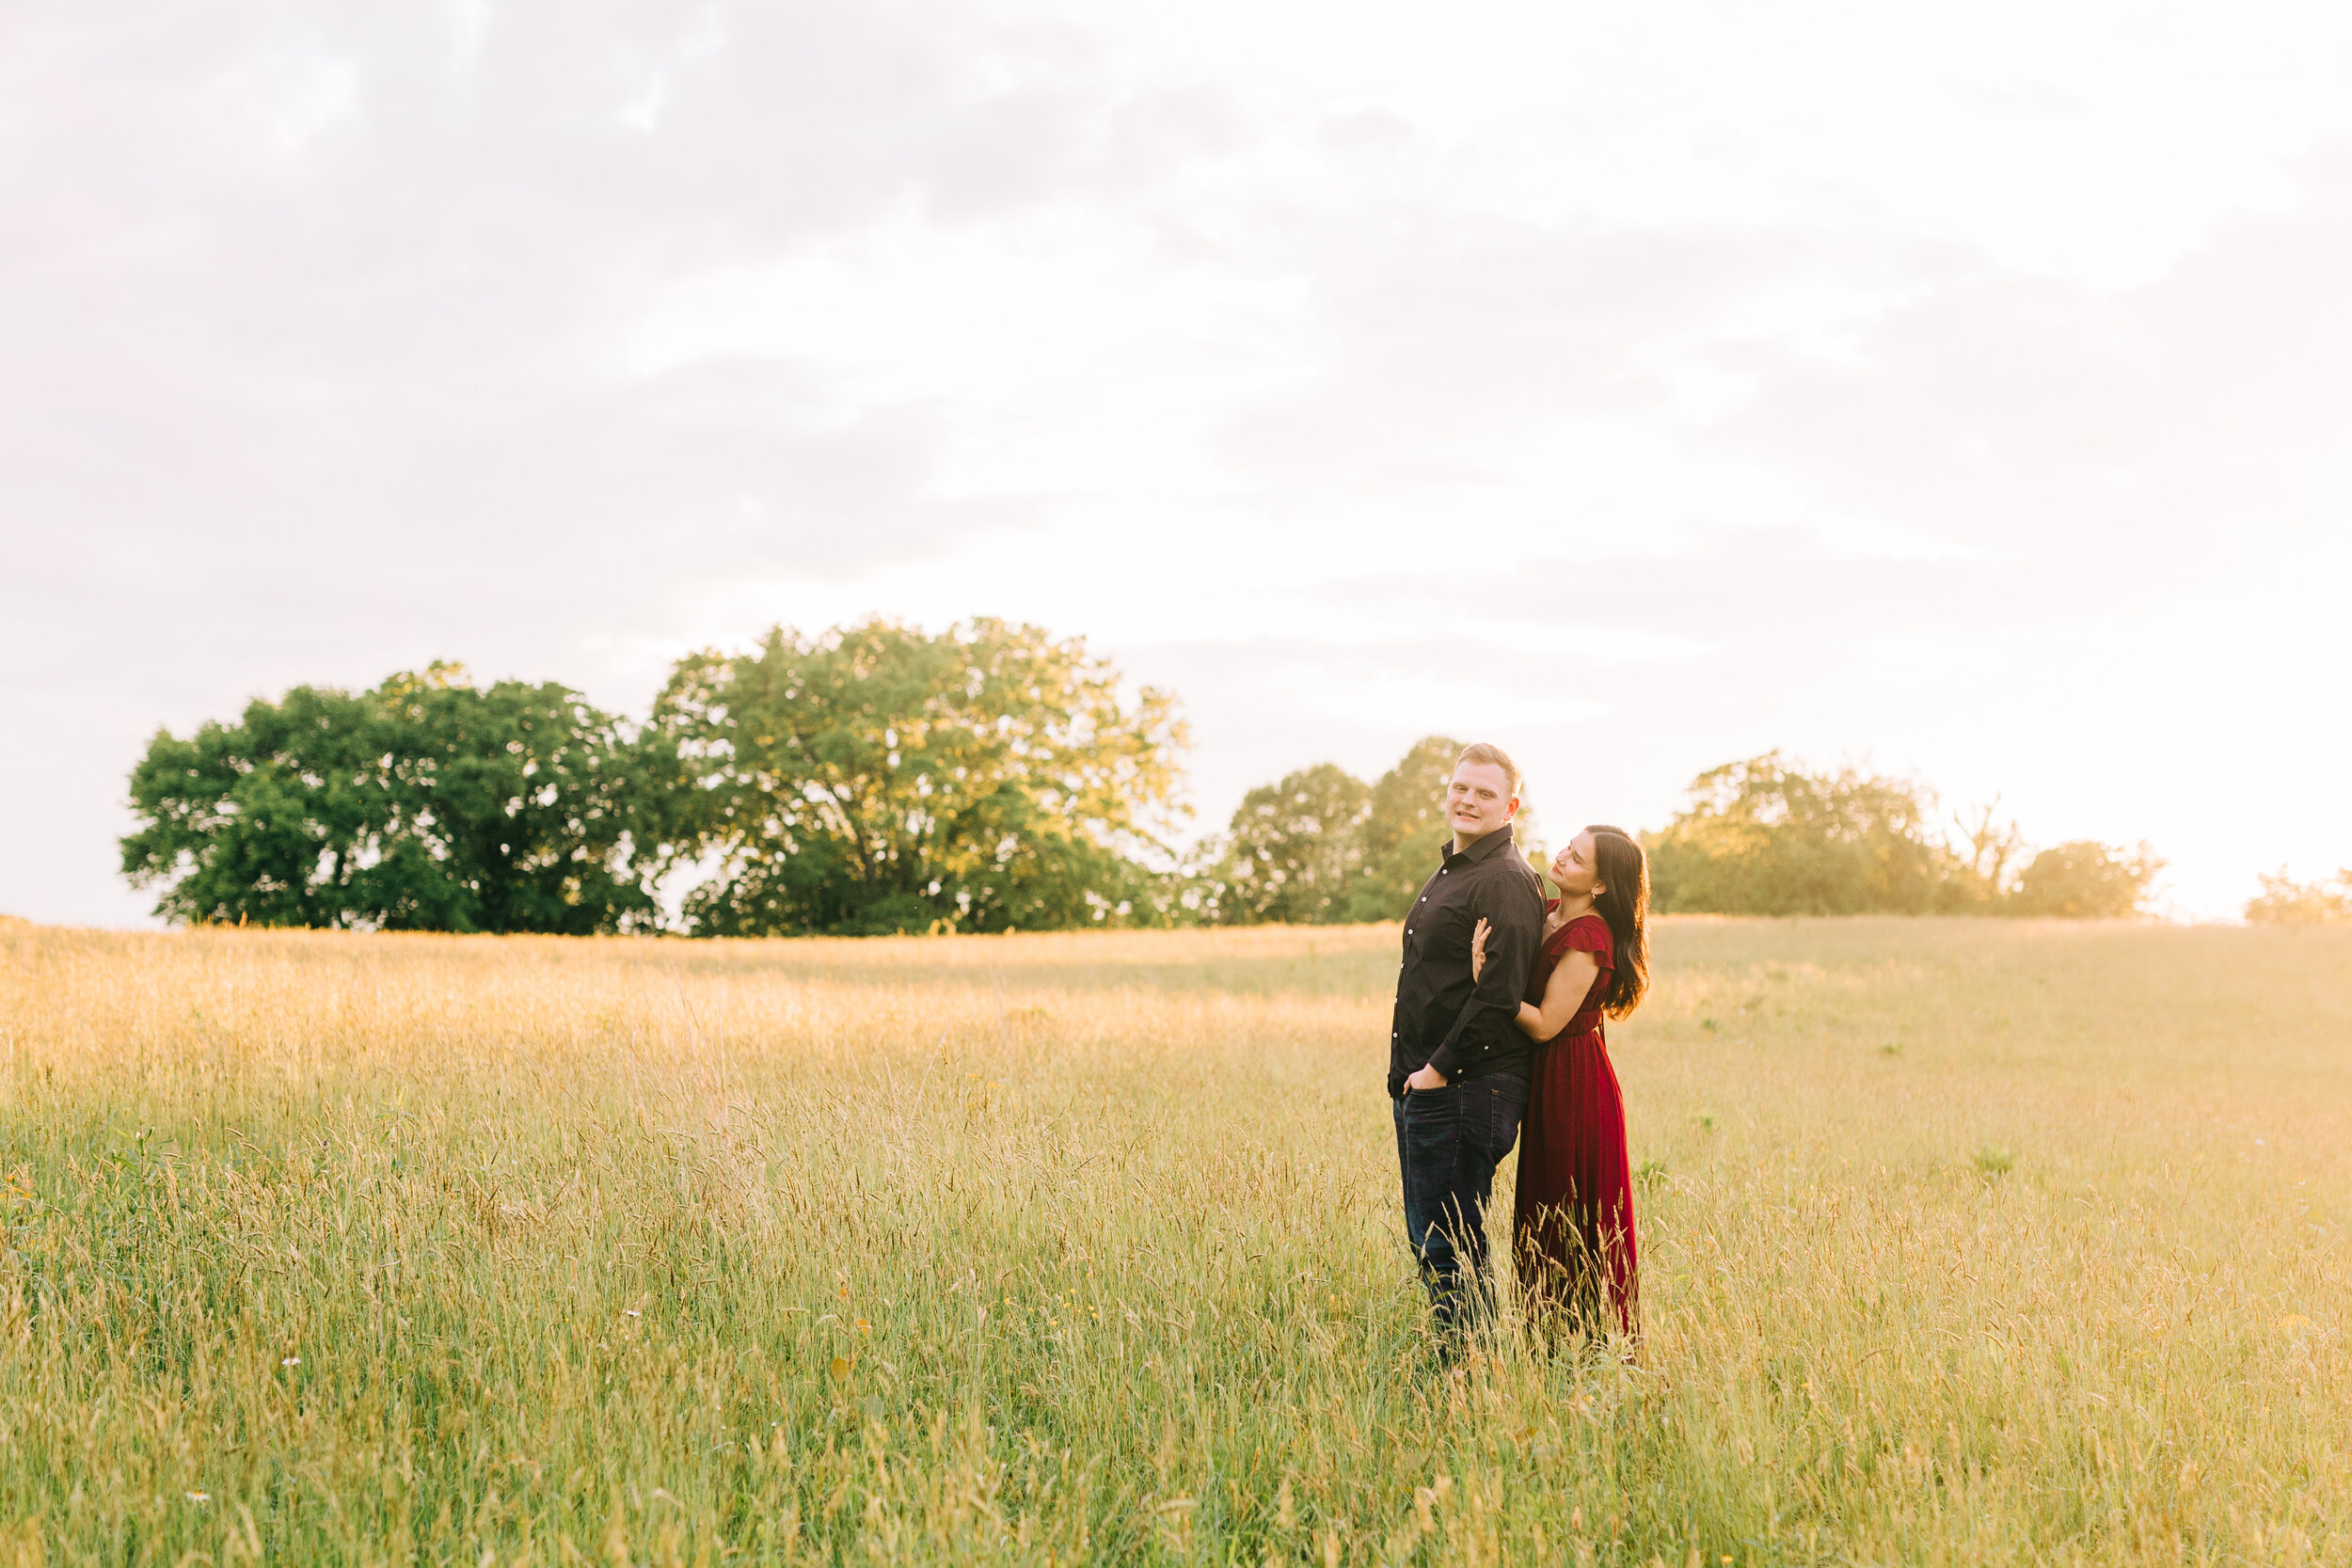 Winx photo knoxville melton hill engagement photos